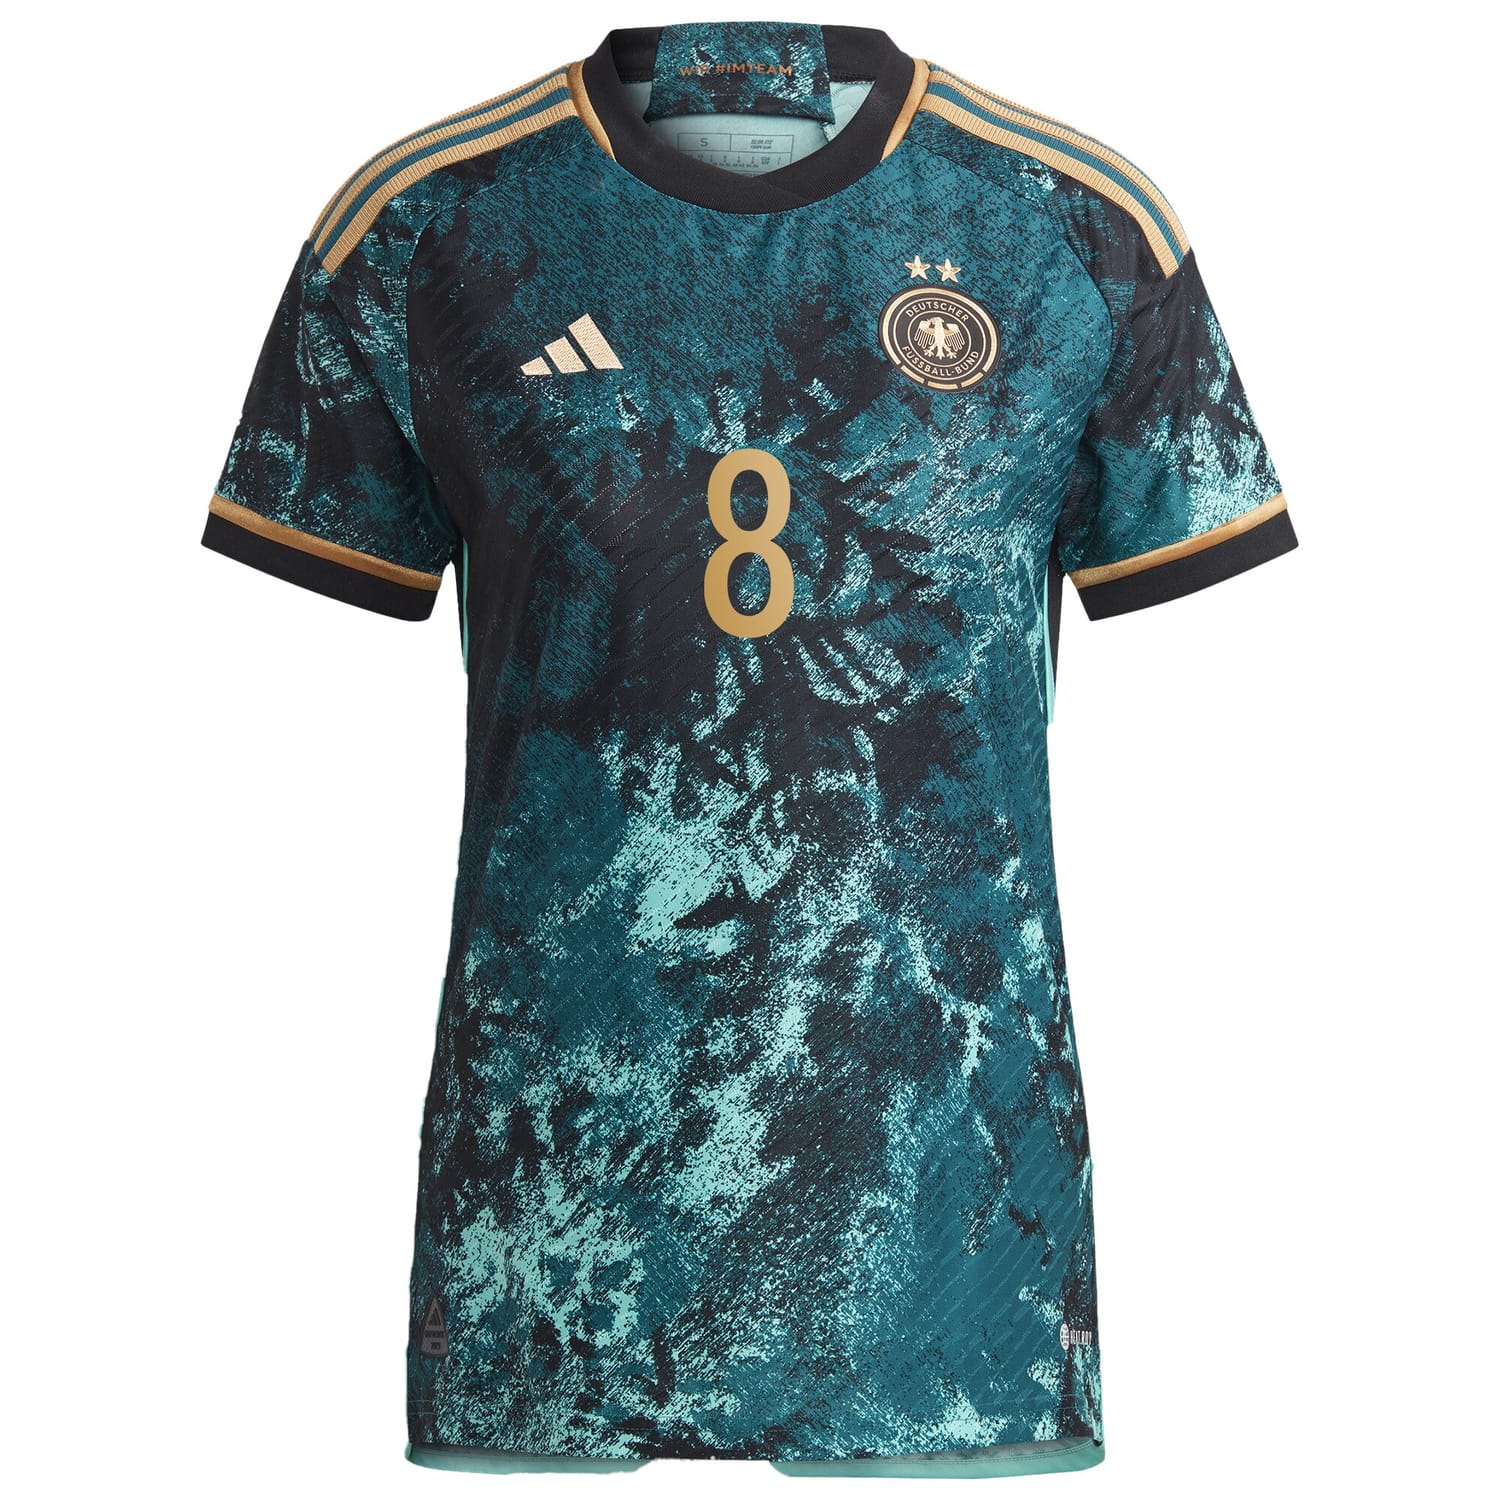 Germany National Team Away Authentic Jersey Shirt 2023 player Sydney Lohmann 8 printing for Women